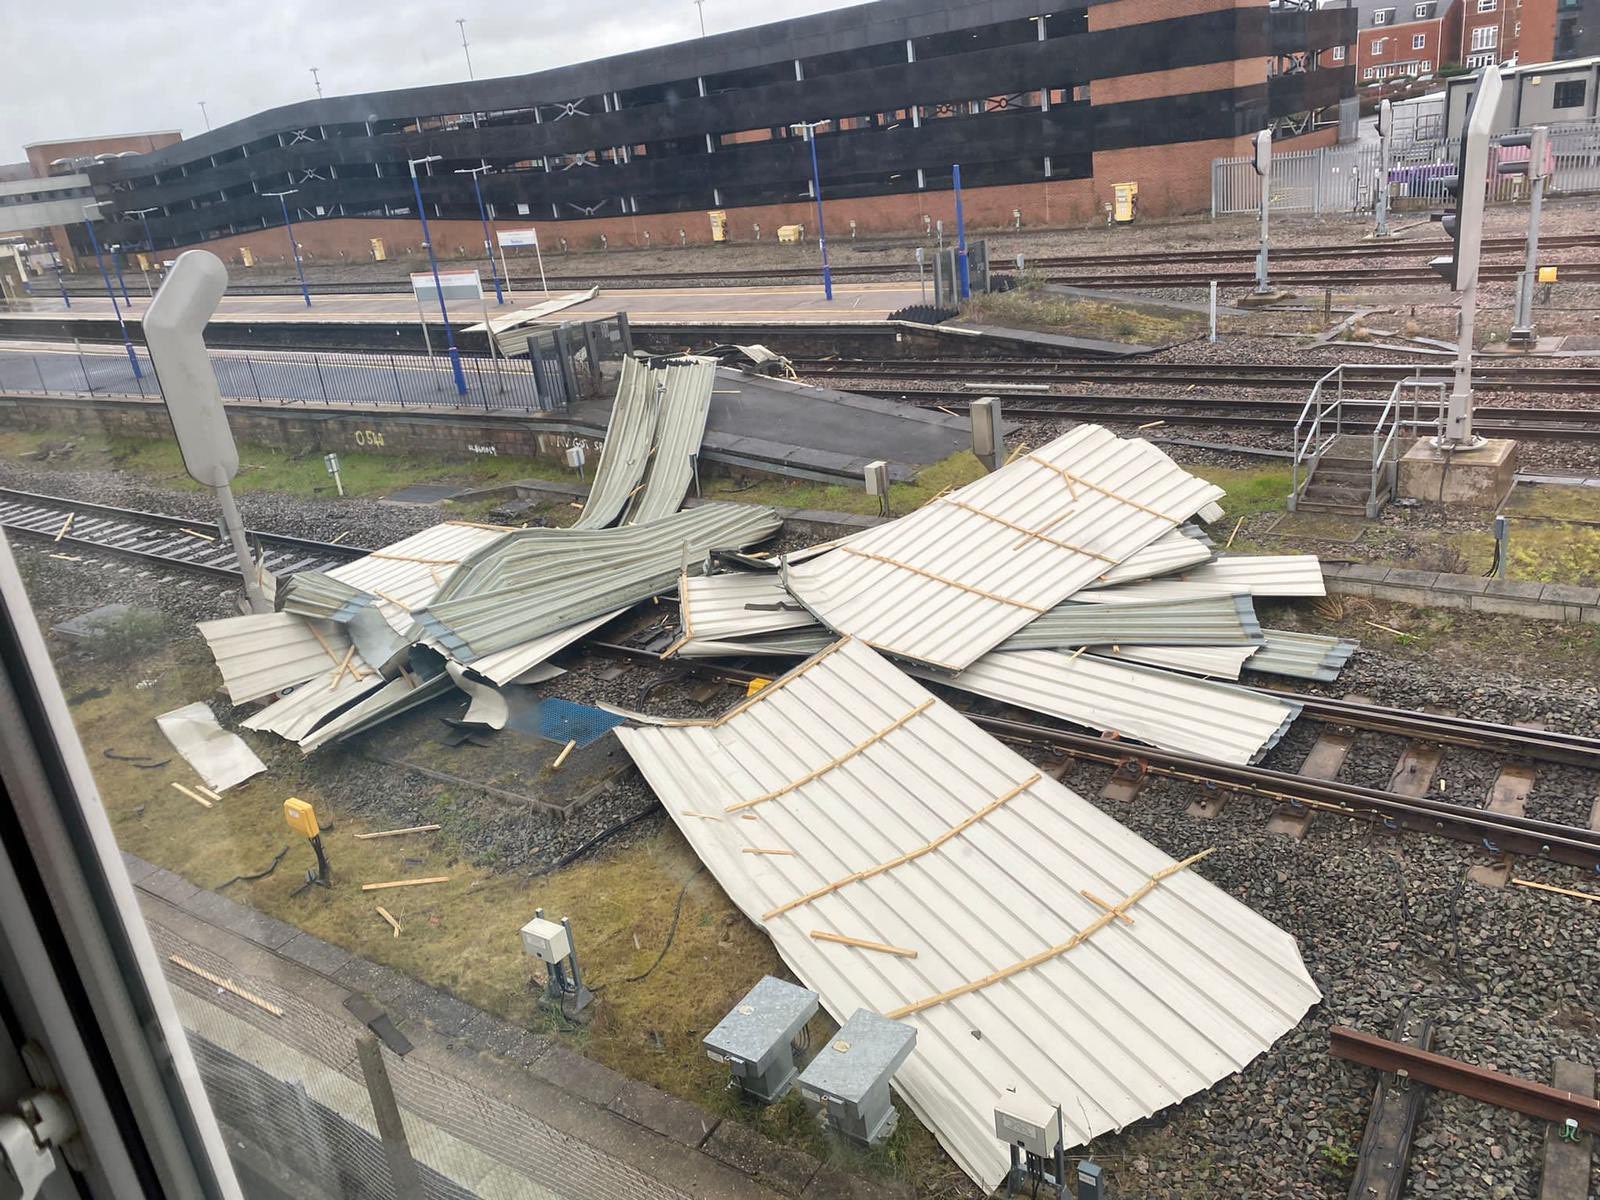 The roof of a building blown onto the tracks at Banbury, Oxfordshire, during Storm Eunice (PA/ @NetworkRailCML)